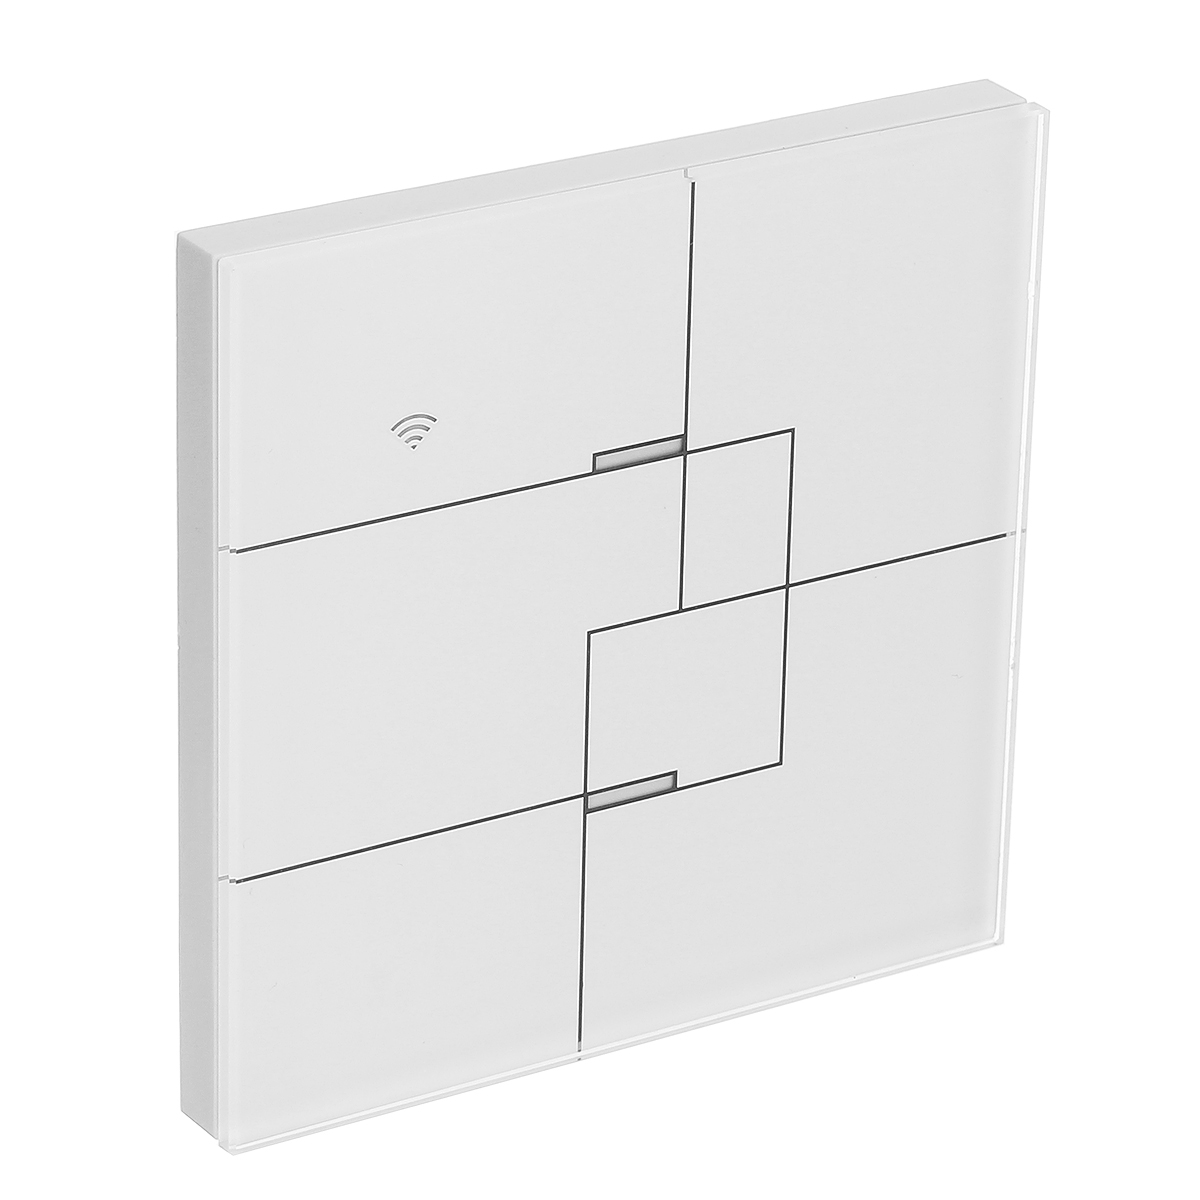 123-Way-AC100-240V-Smart-Wifi-Light-Switch-Wall-Touch-Switch-Panel-Work-with-Alexa-Google-Home-1376031-4